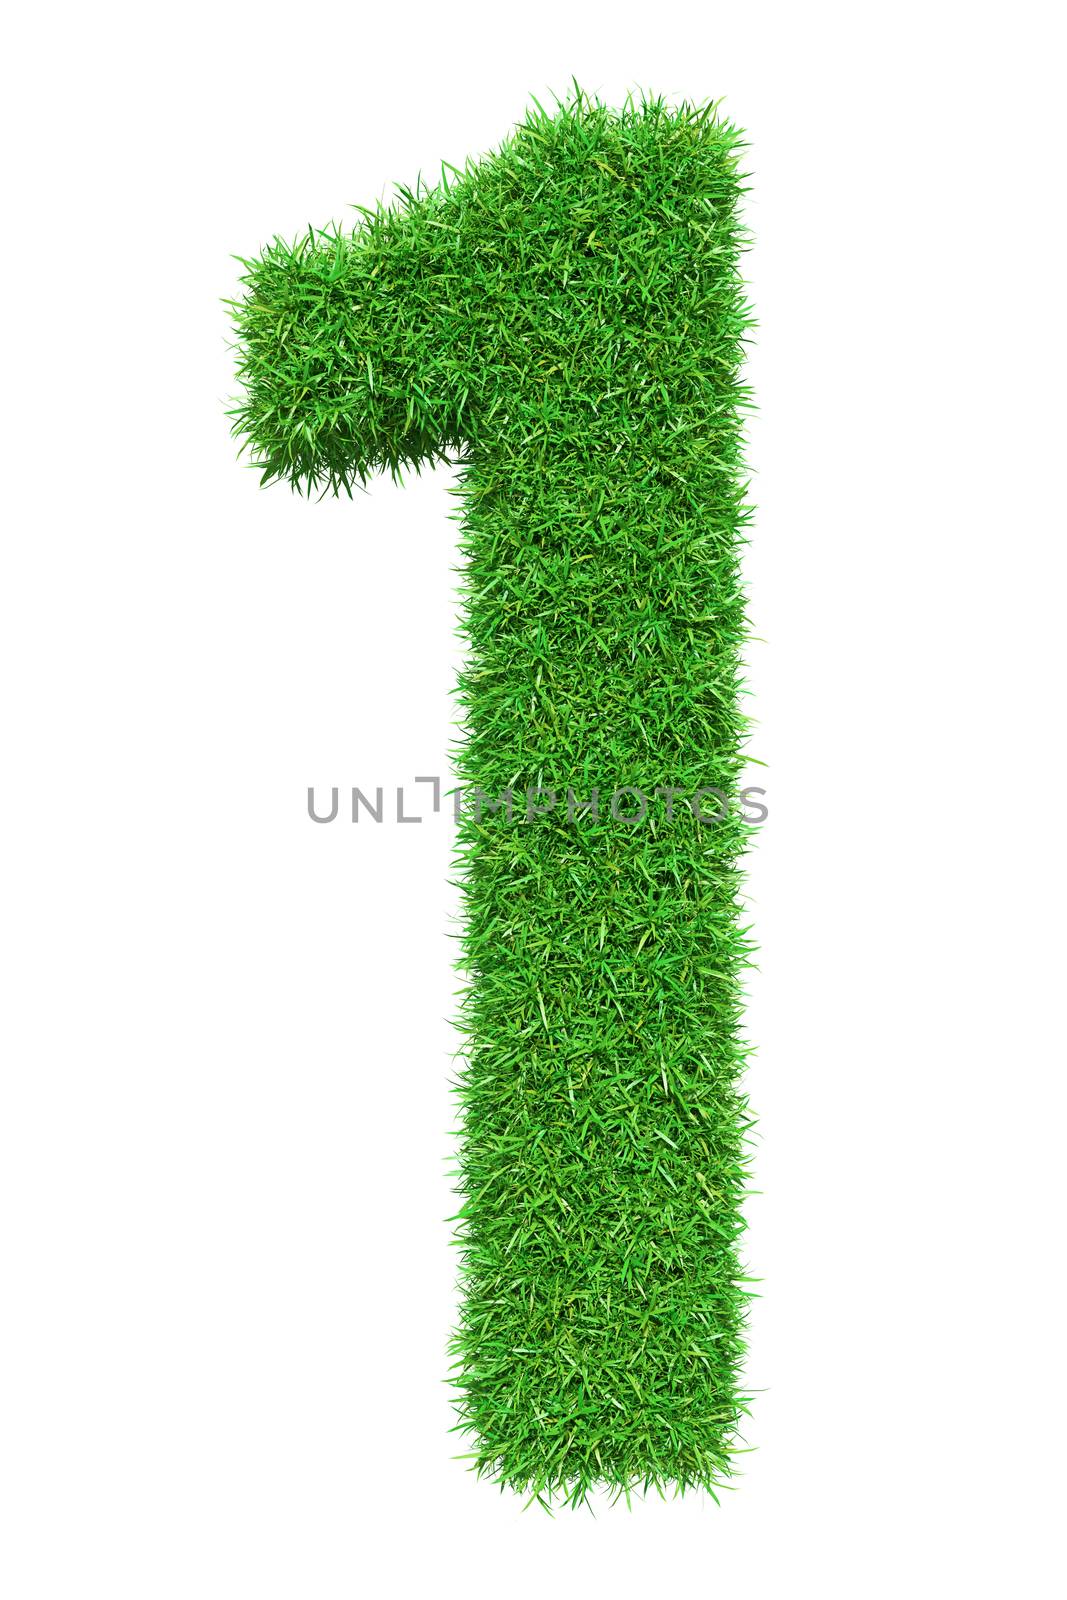 Green grass number 1, isolated on white background. 3D illustration